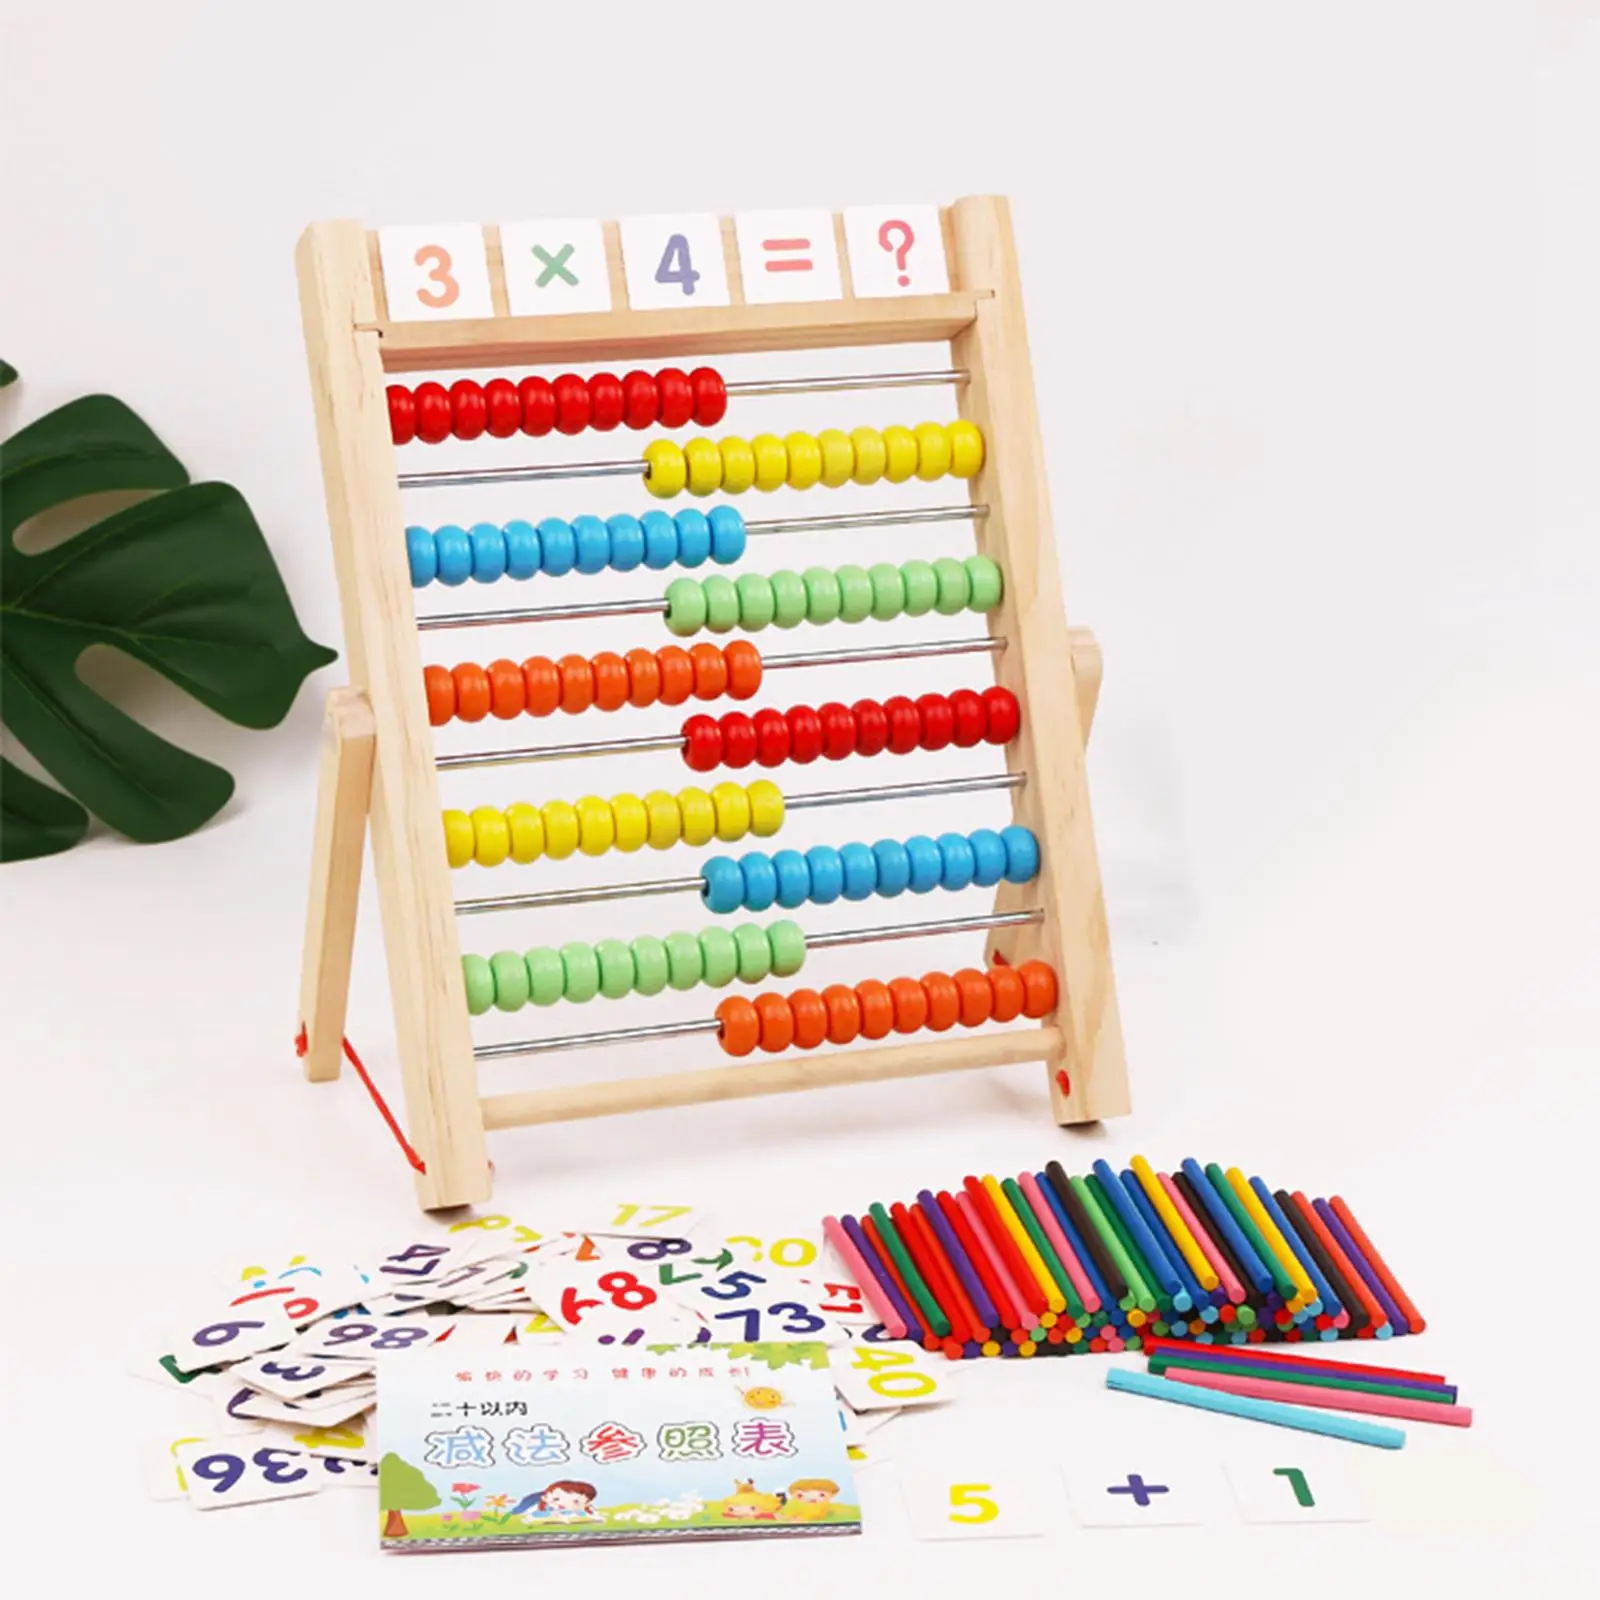 Wooden Frame Abacus Math Learning Toy with Multi Color Beads Educational Counting Toy for Kids Kindergarten Boys Girls Children